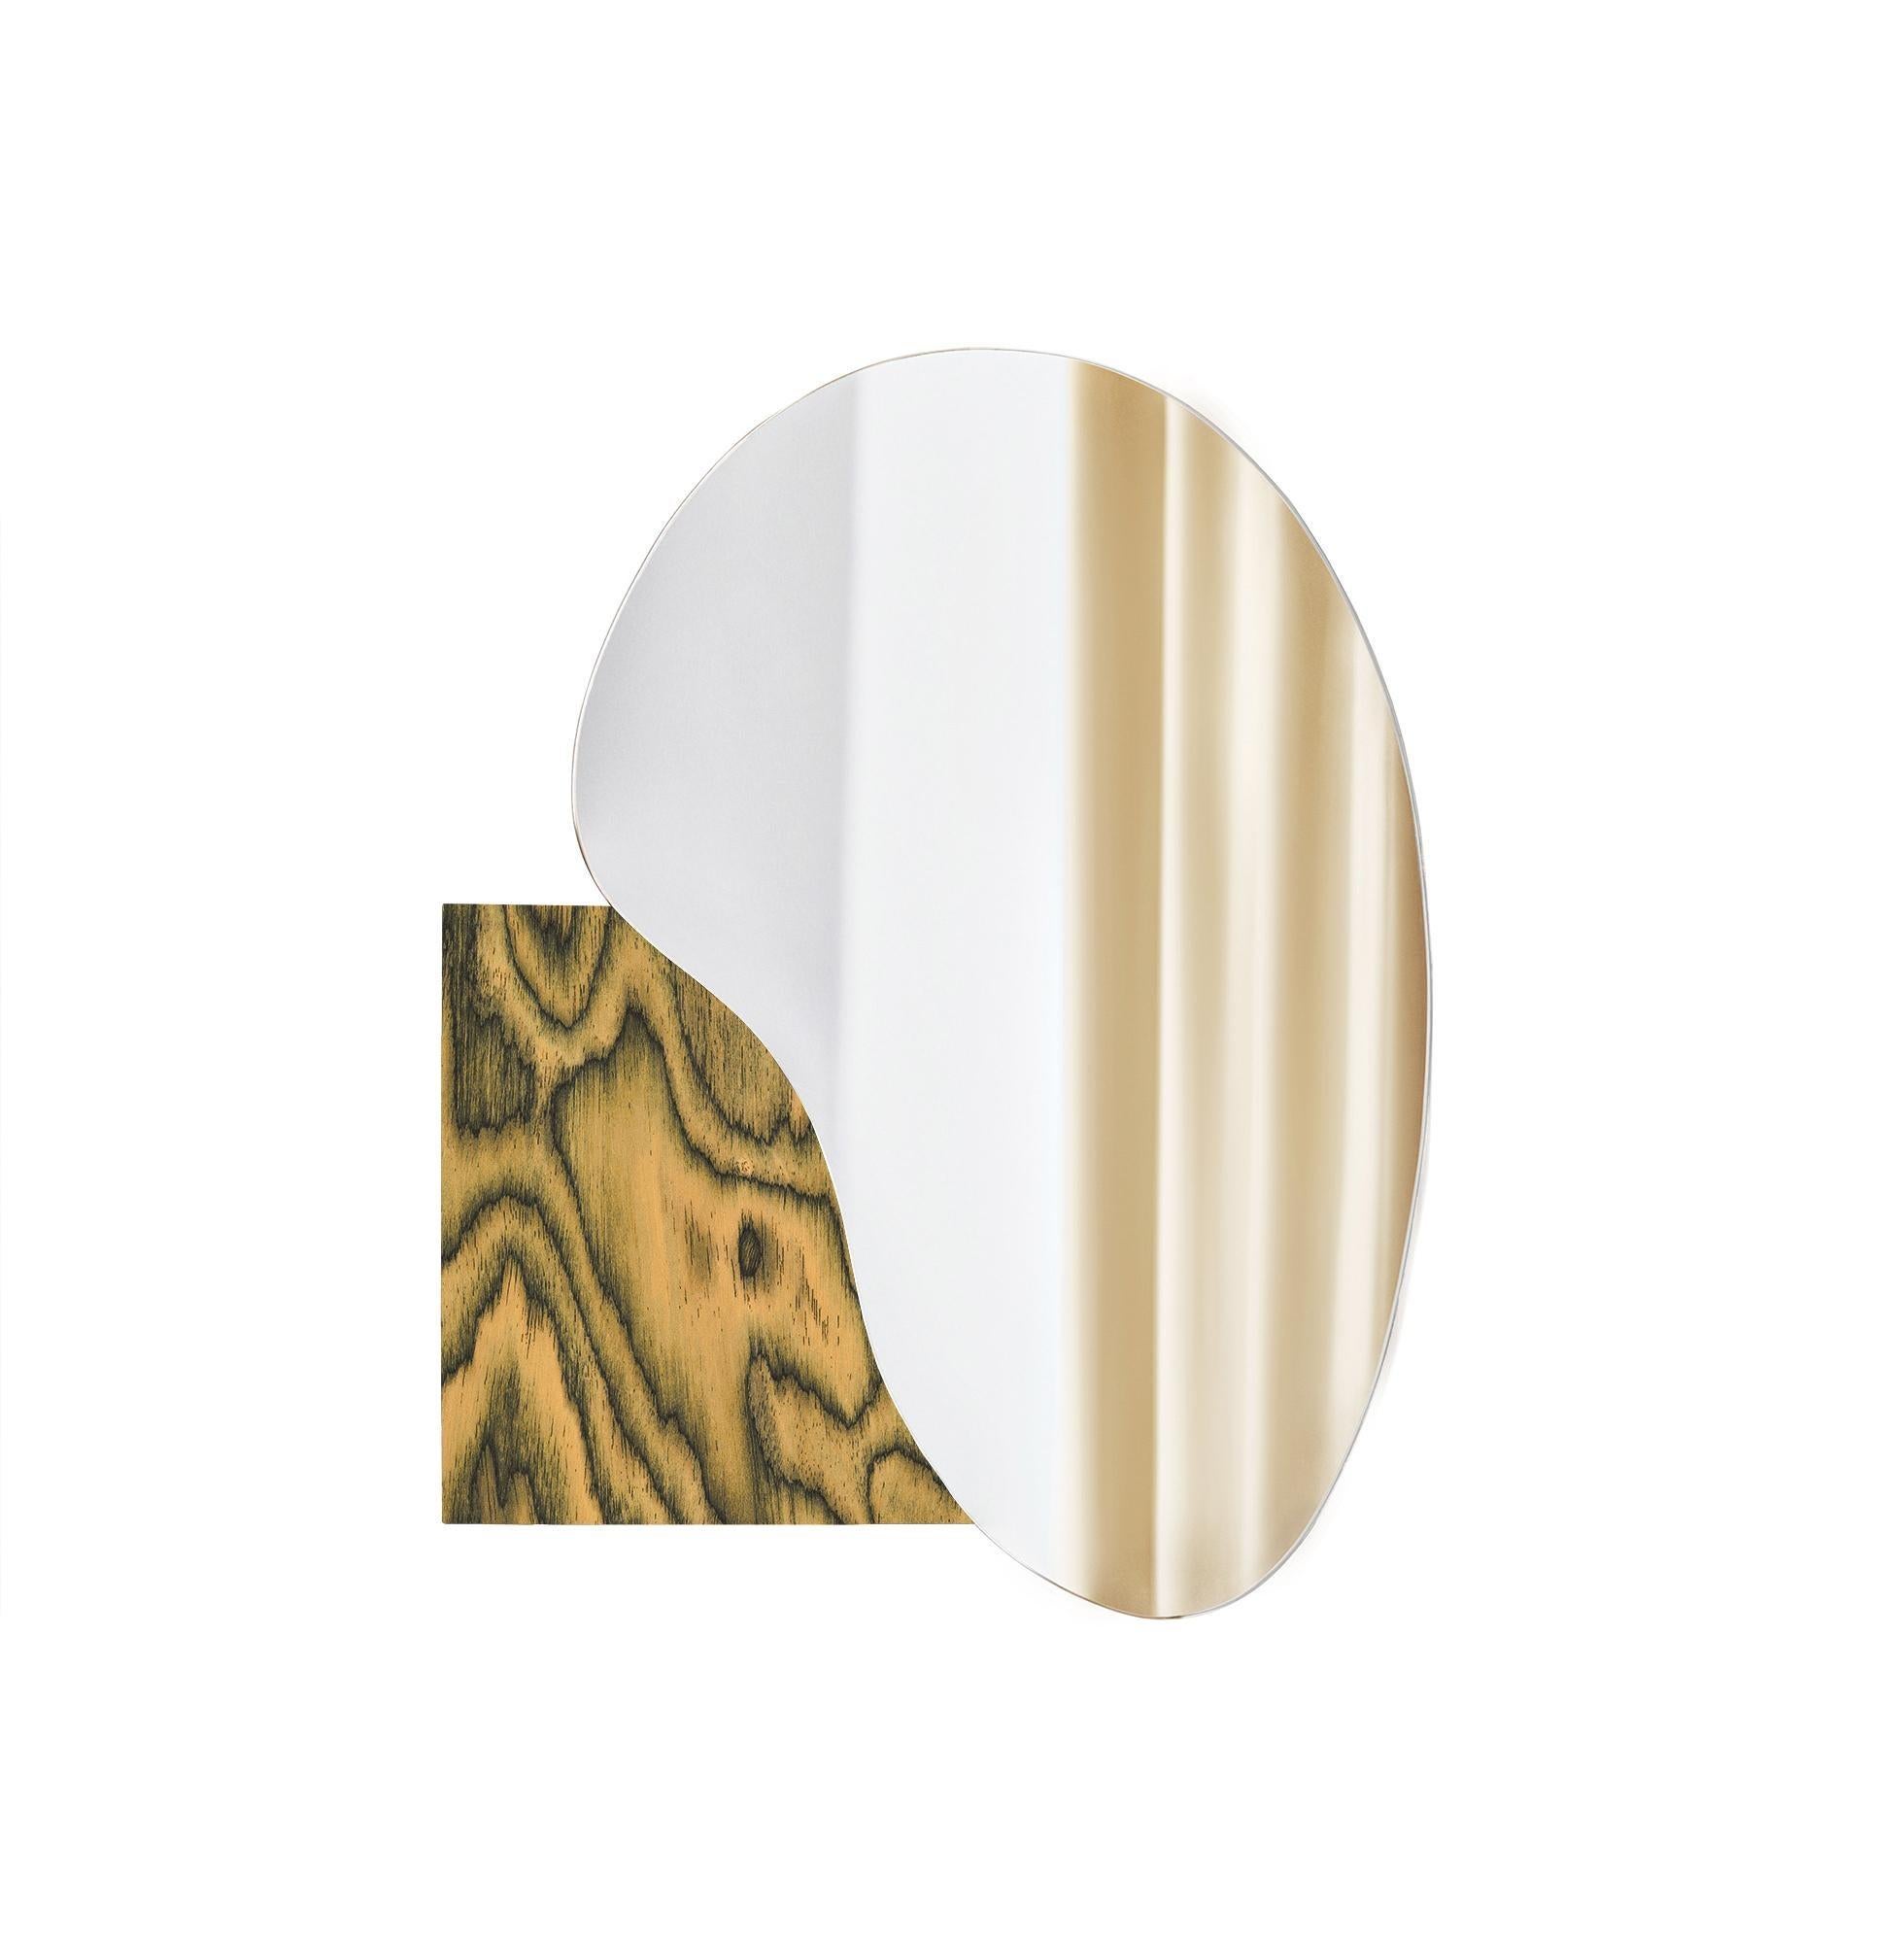 Organic Modern Contemporary Wall Mirror 'Lake 4' by Noom, ALPI Wood Veneer For Sale